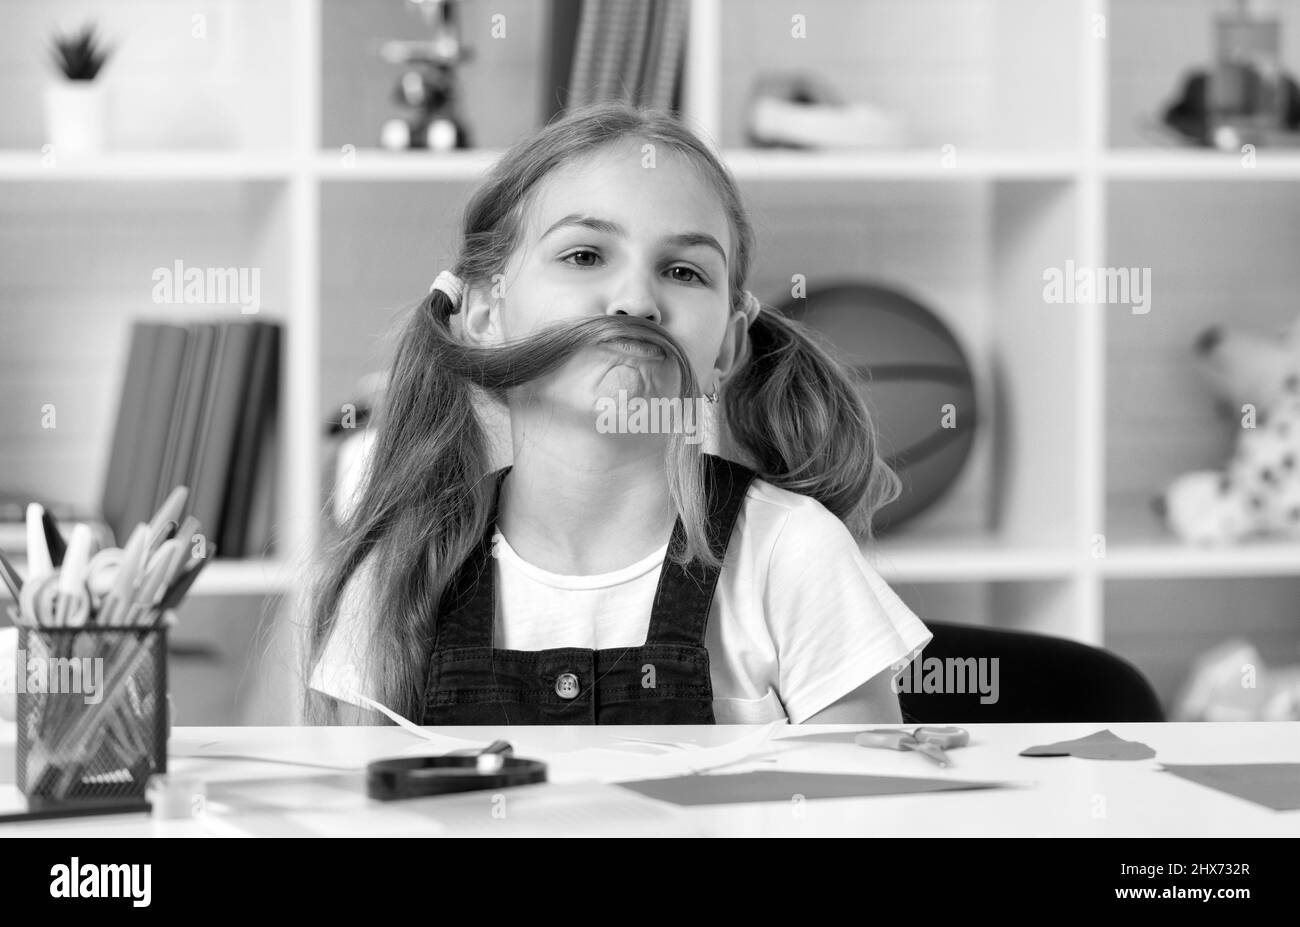 funny child having fun with long hair pony tail at school lesson in classroom wear uniform, fun Stock Photo